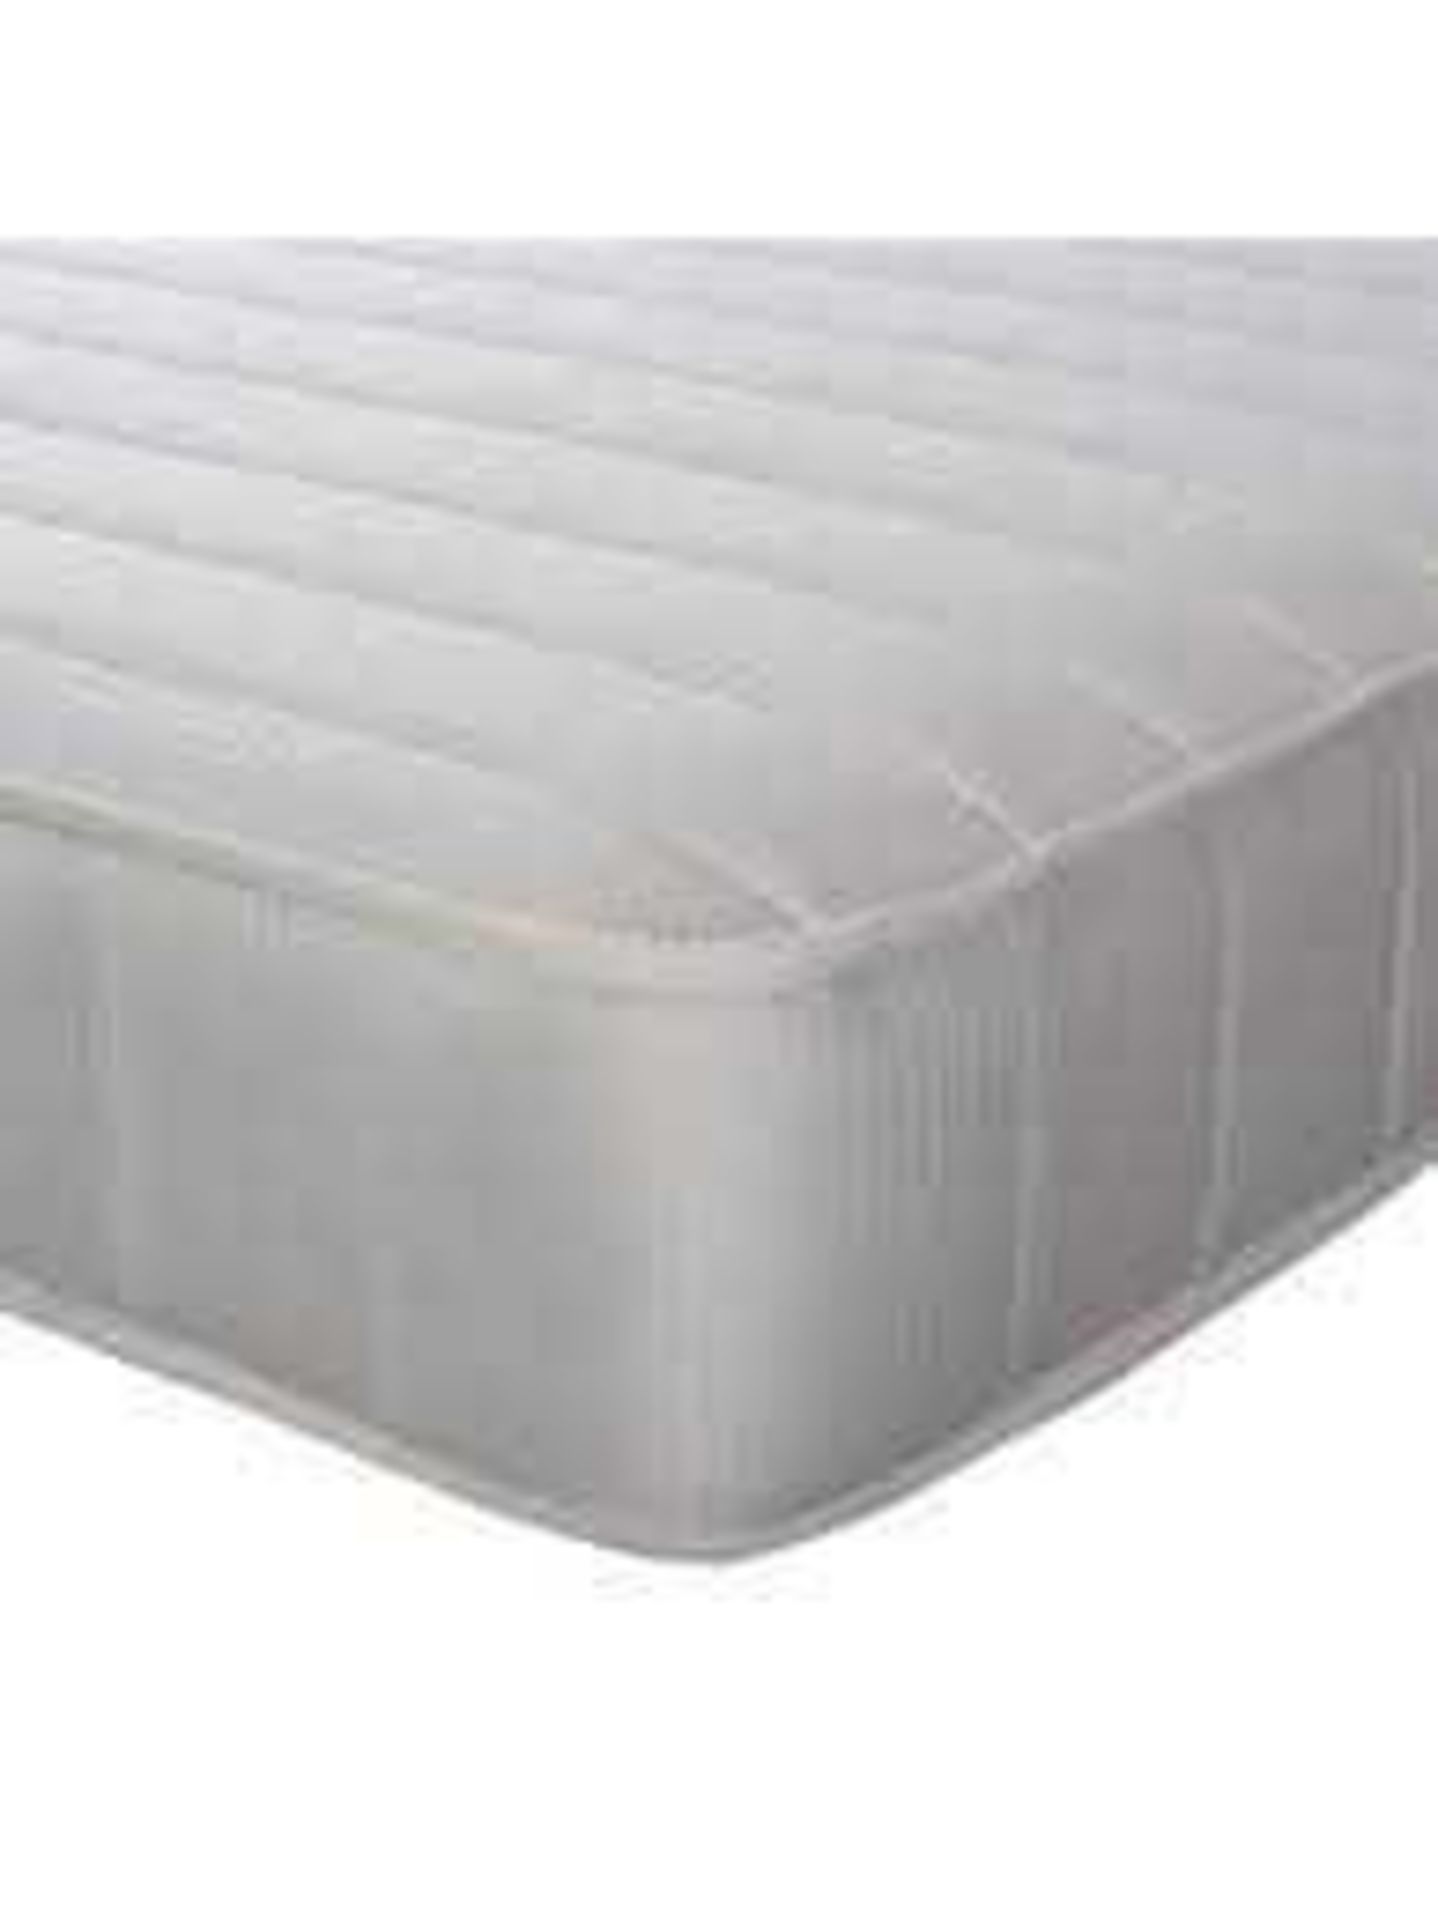 RRP £180 90X190Cm John Lewis And Partners Special Buy Luxury Pocket 1000 No Turn Single Mattress